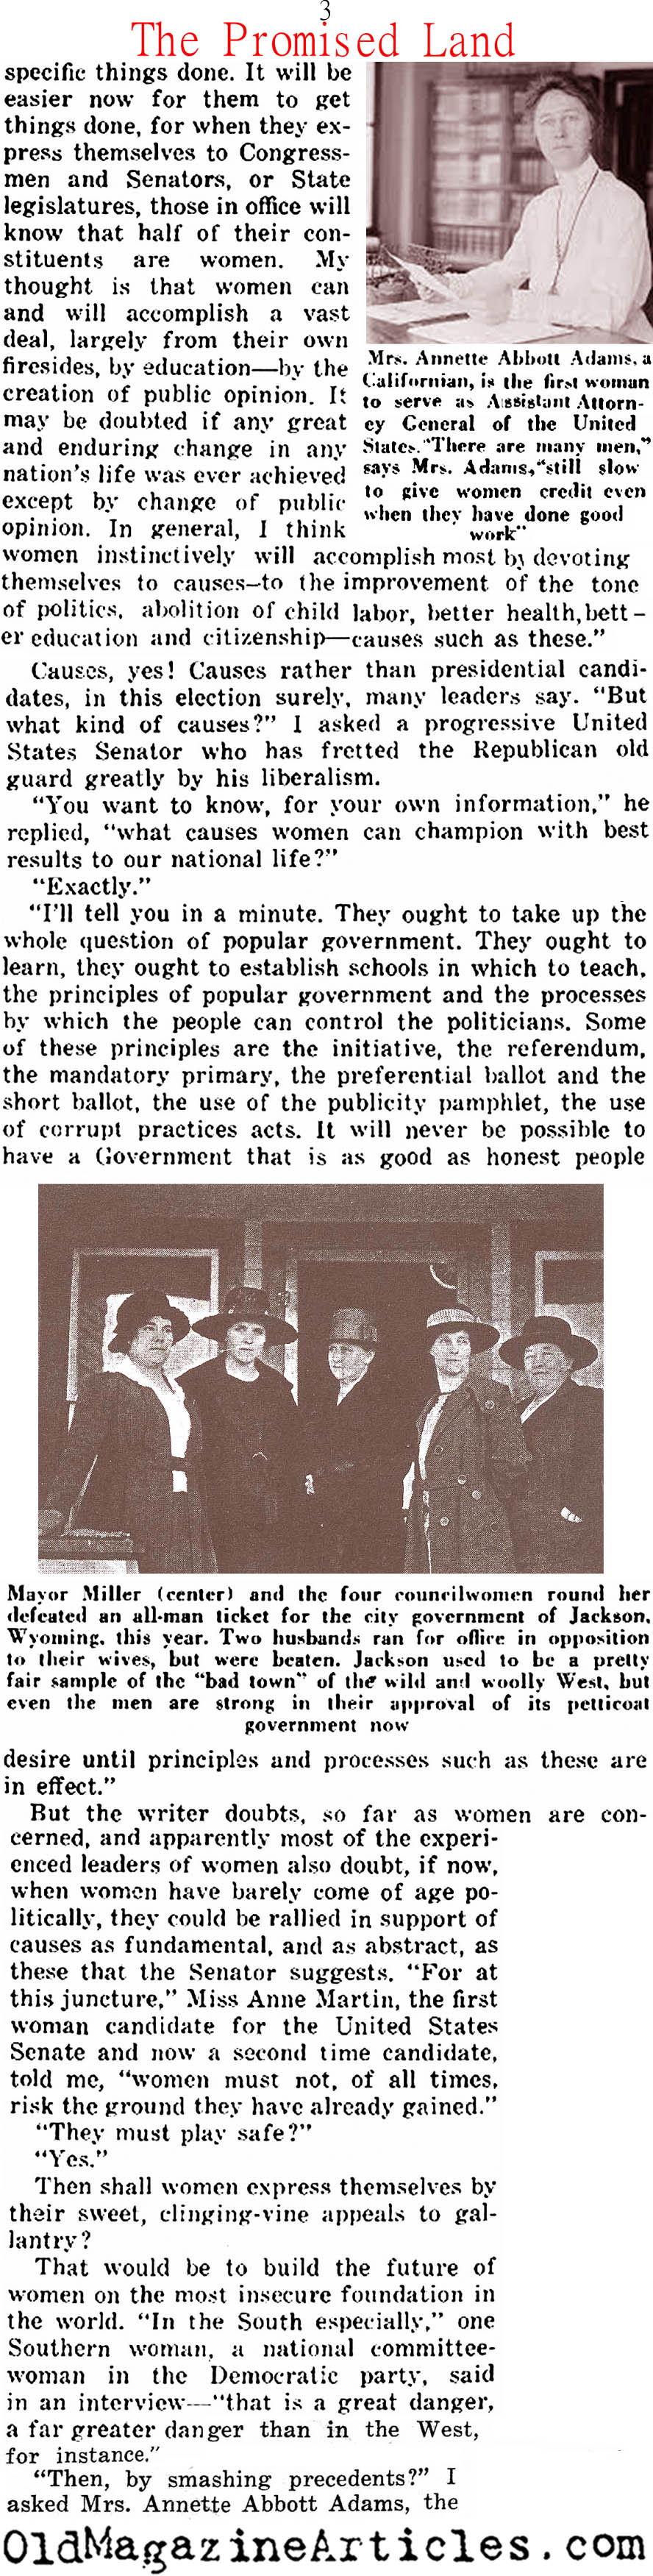 The Vote Obtained (The Independent, 1920)